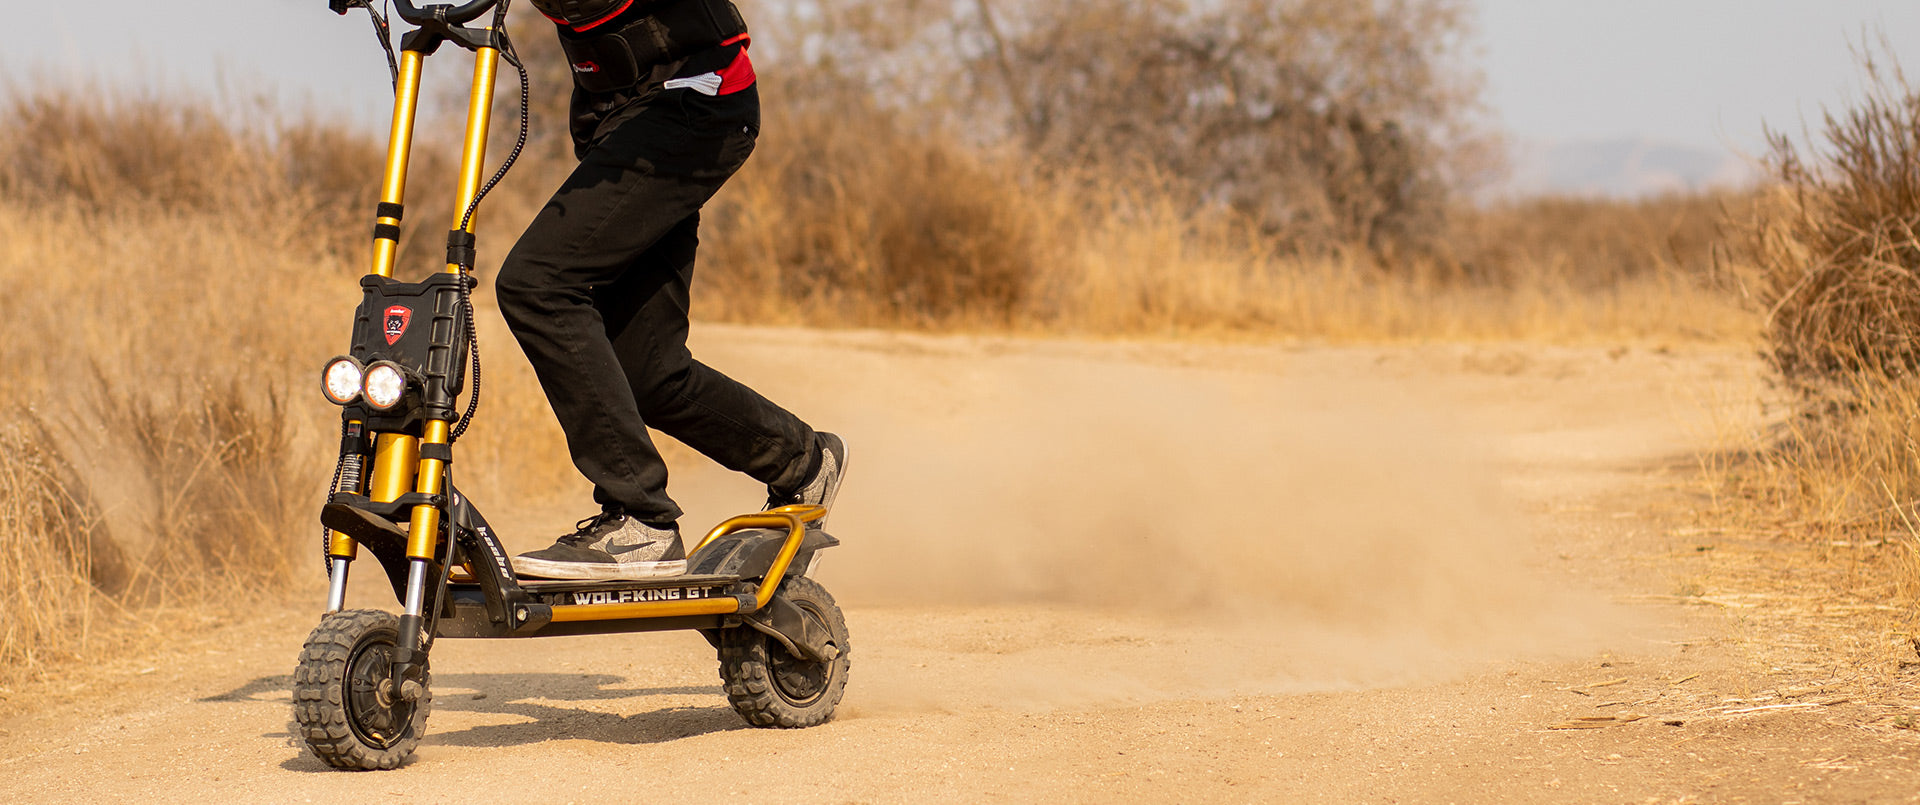 Action shot of a rider on a Kaabo Wolf King GT Pro electric scooter navigating an off-road trail, with dust swirling behind, highlighting the robust performance and adventure-ready design of the scooter.